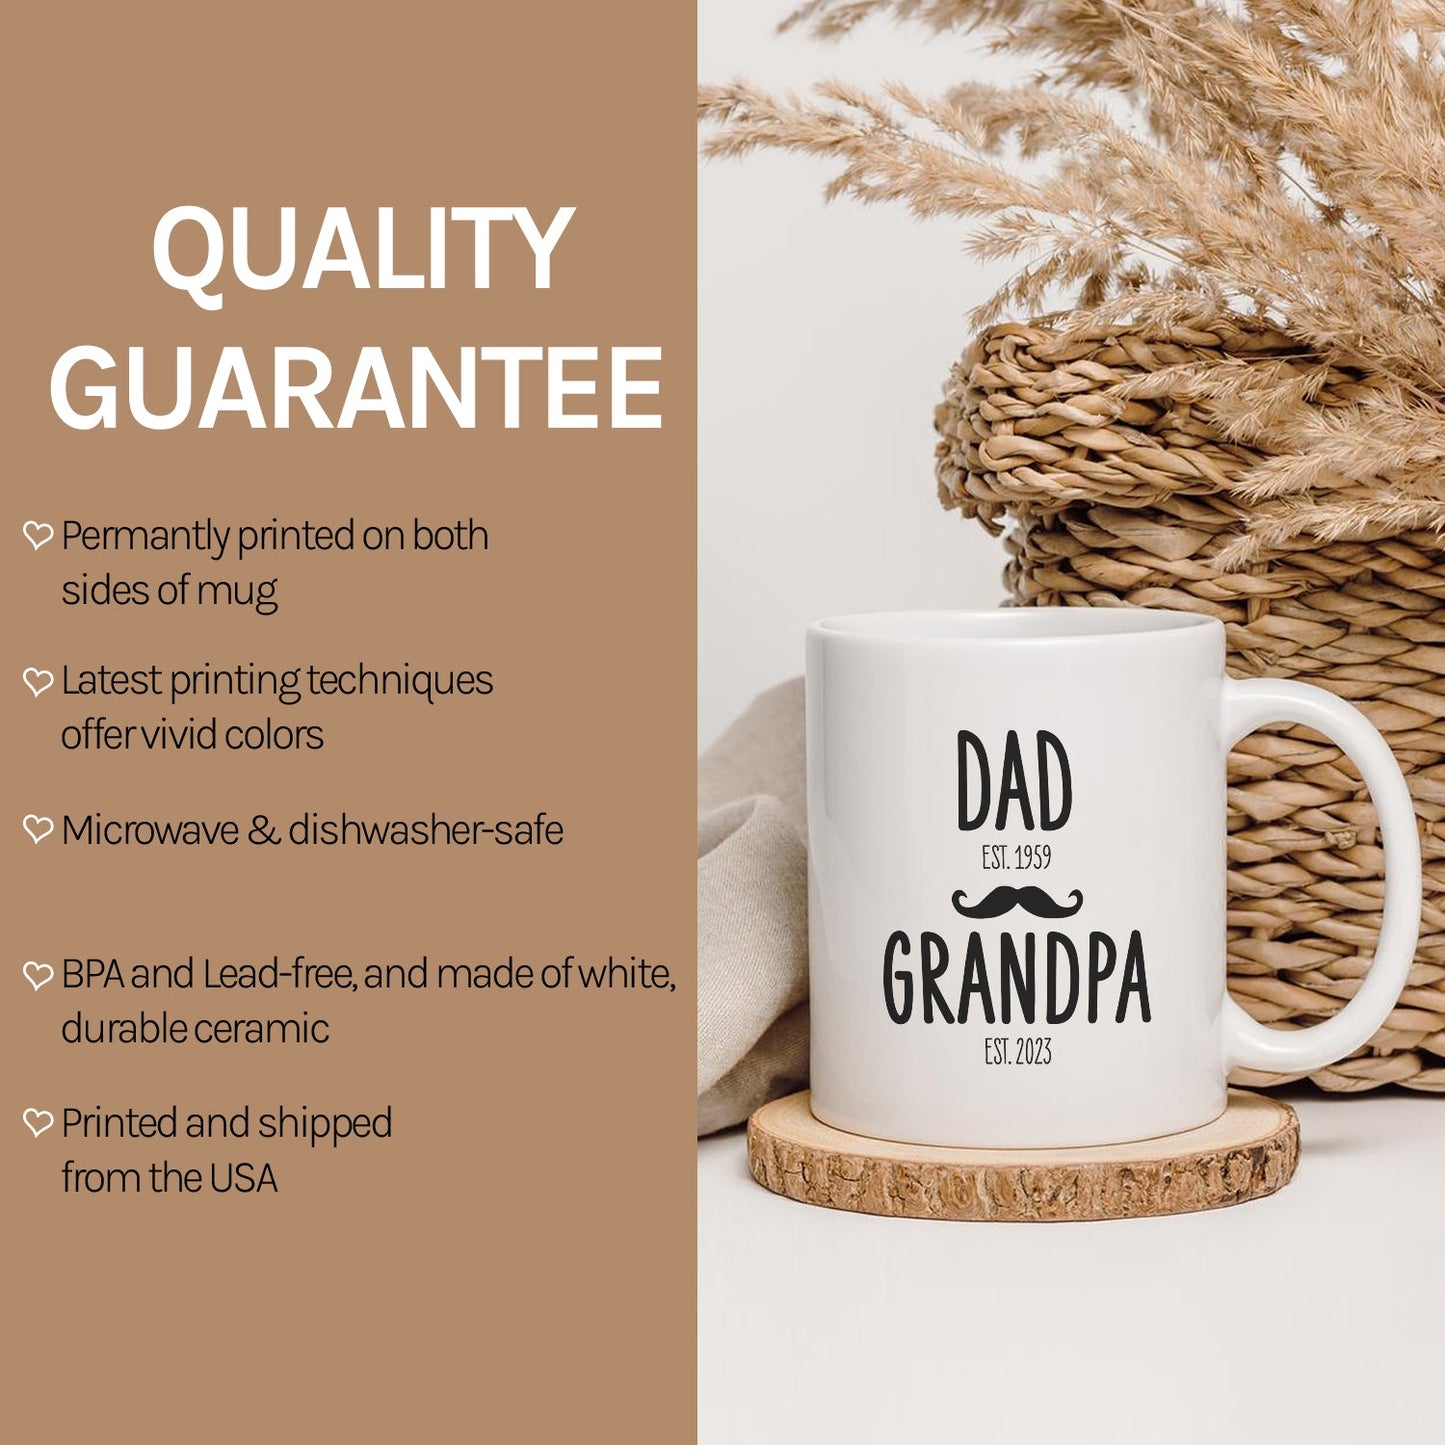 Not only a dad - Personalized Father's Day or Birthday gift for Grandpa or for Dad - Custom Mug - MyMindfulGifts